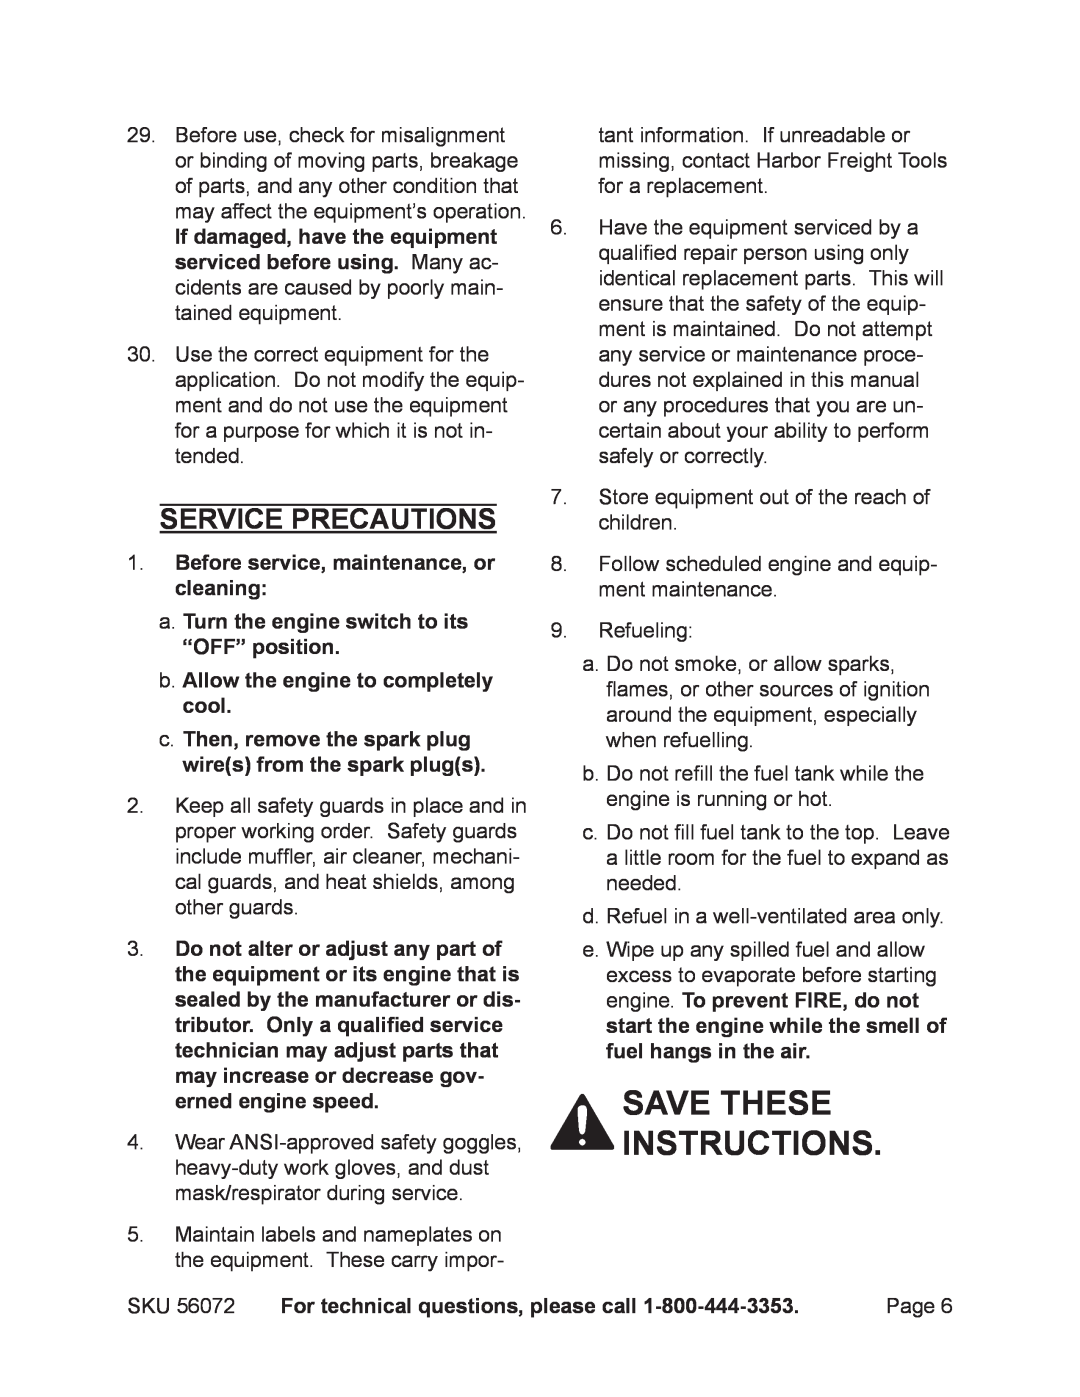 Harbor Freight Tools 56072 manual Save these instructions, Service precautions 